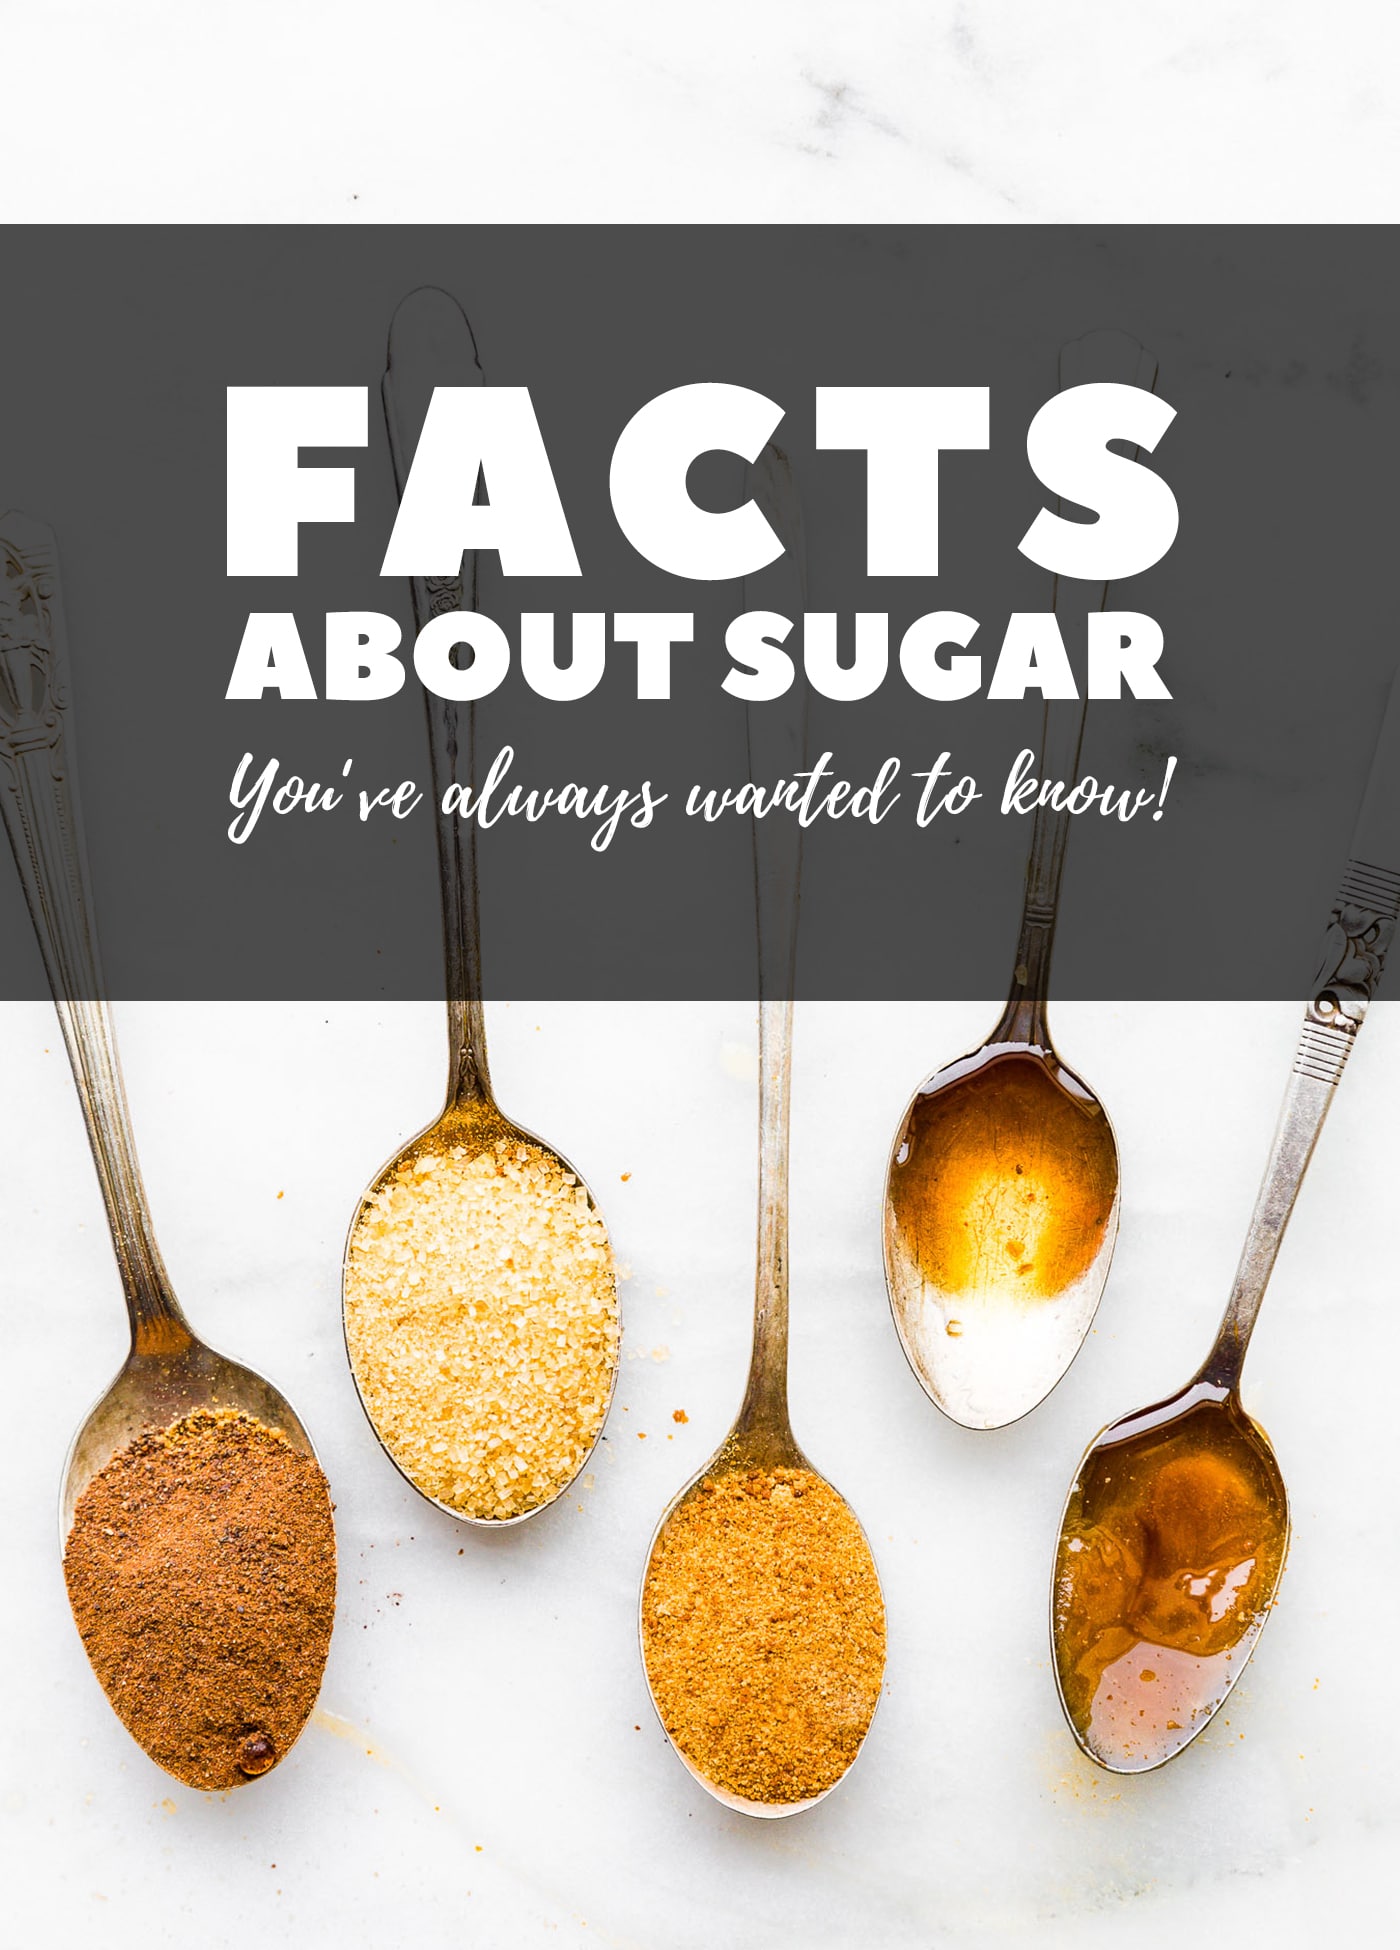 titled Pinterest image: Facts About Sugar You've Always Wanted to Know